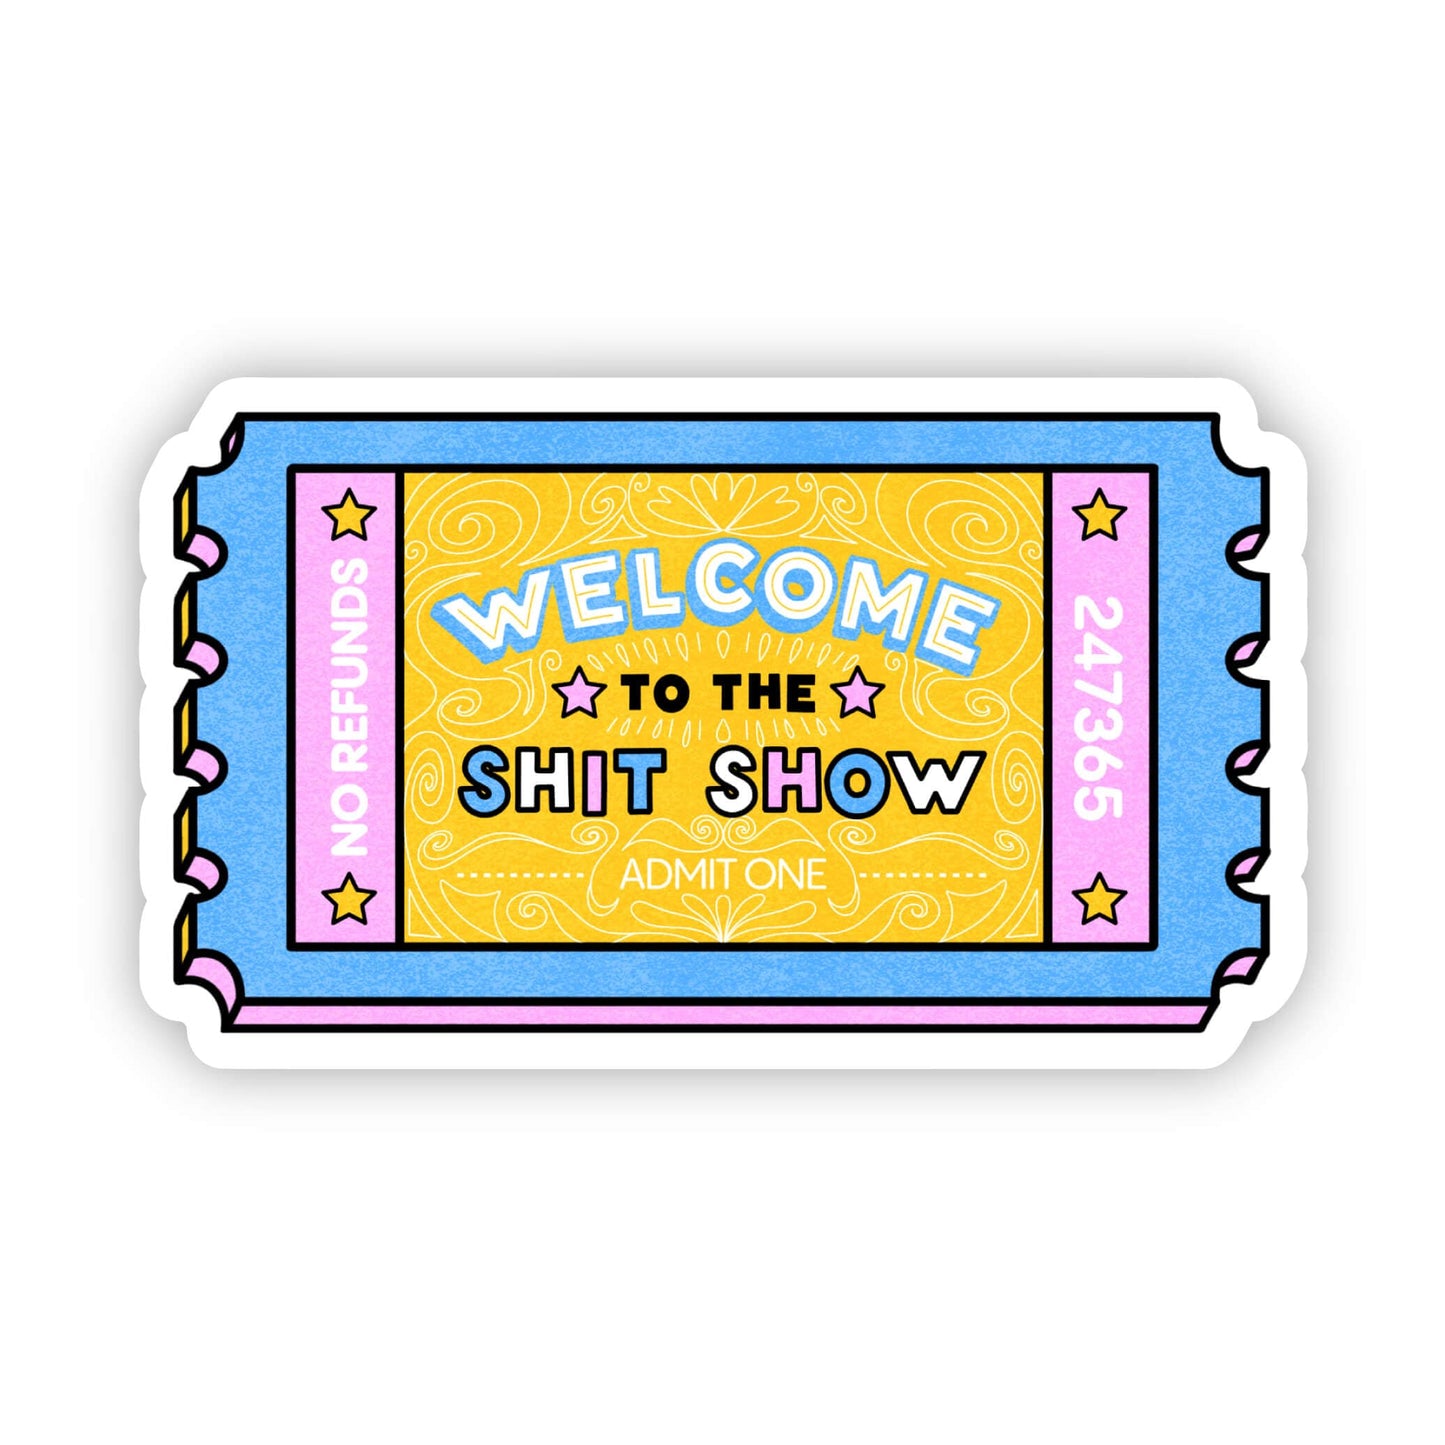 "Welcome to the shit show" Ticket Sticker